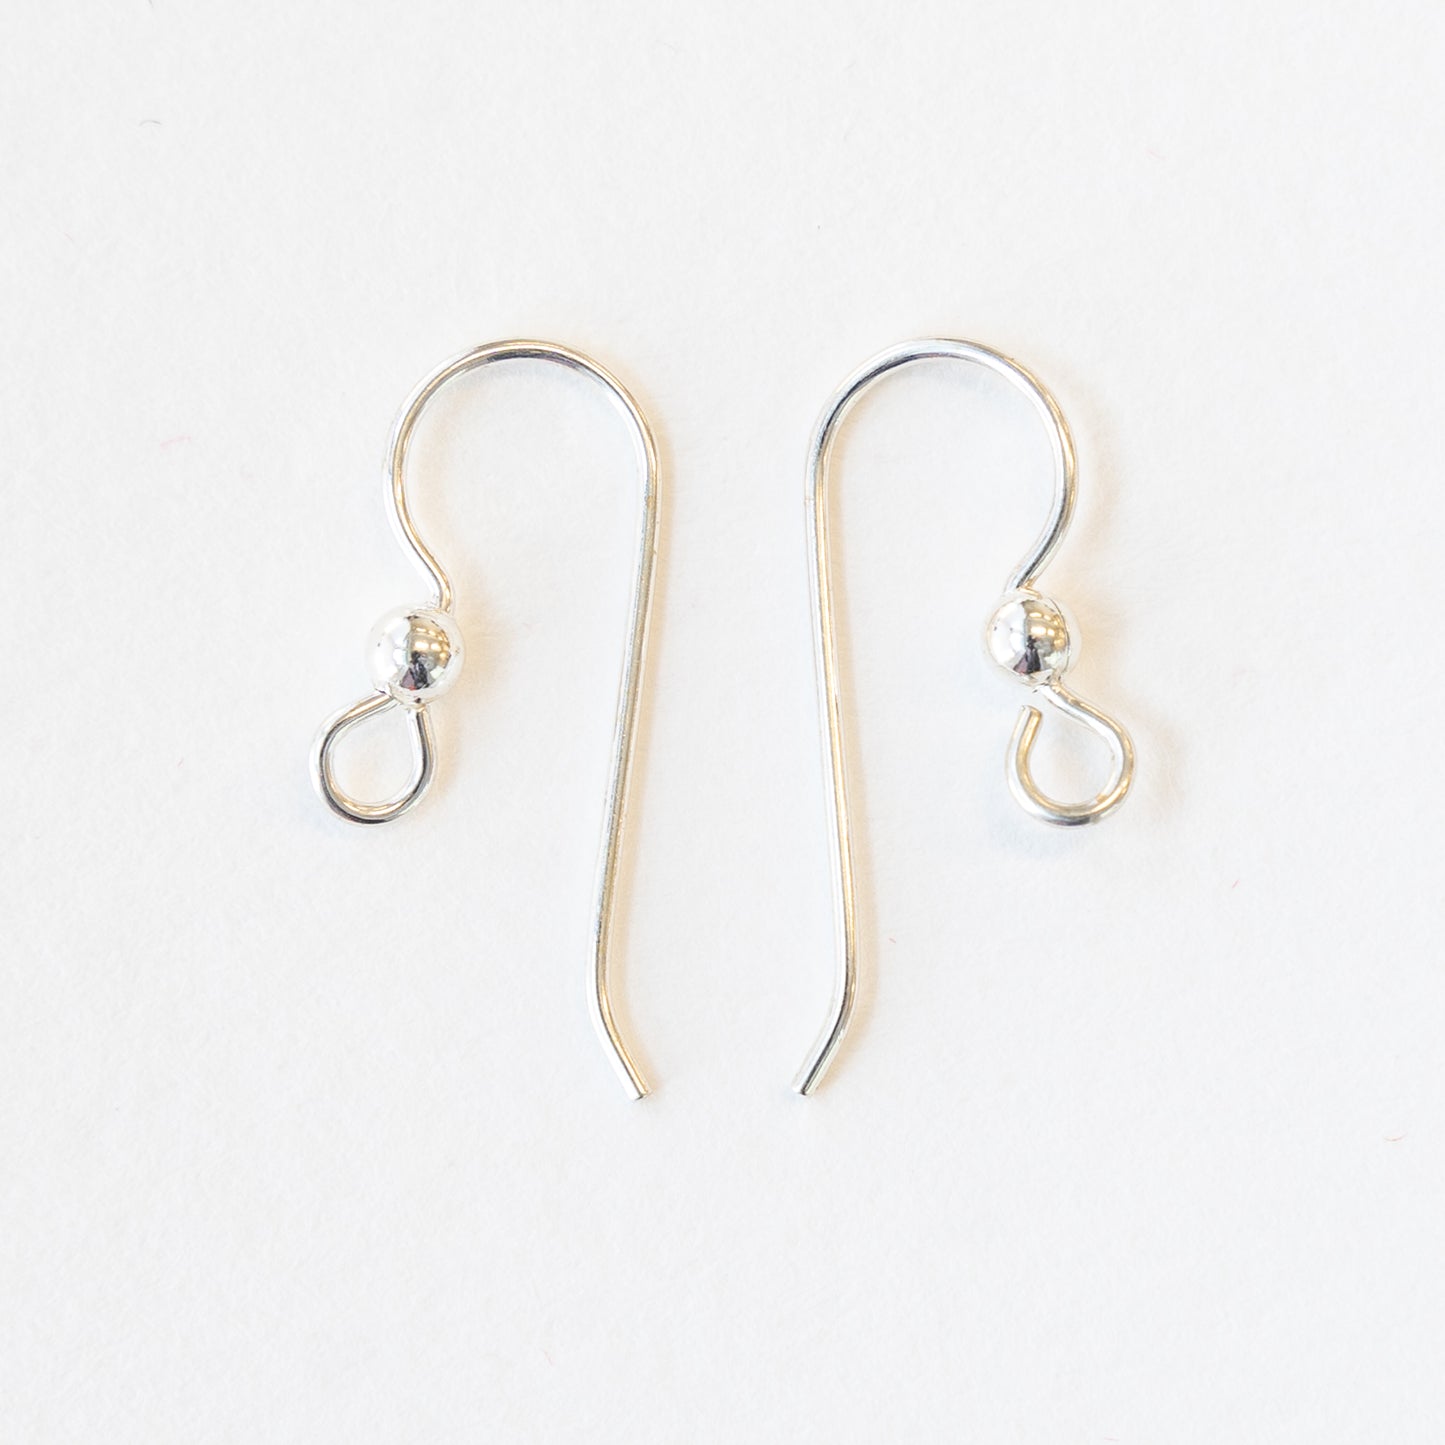 20g Sterling Silver Ear Wires - Silver Ear Hooks with 3mm Ball